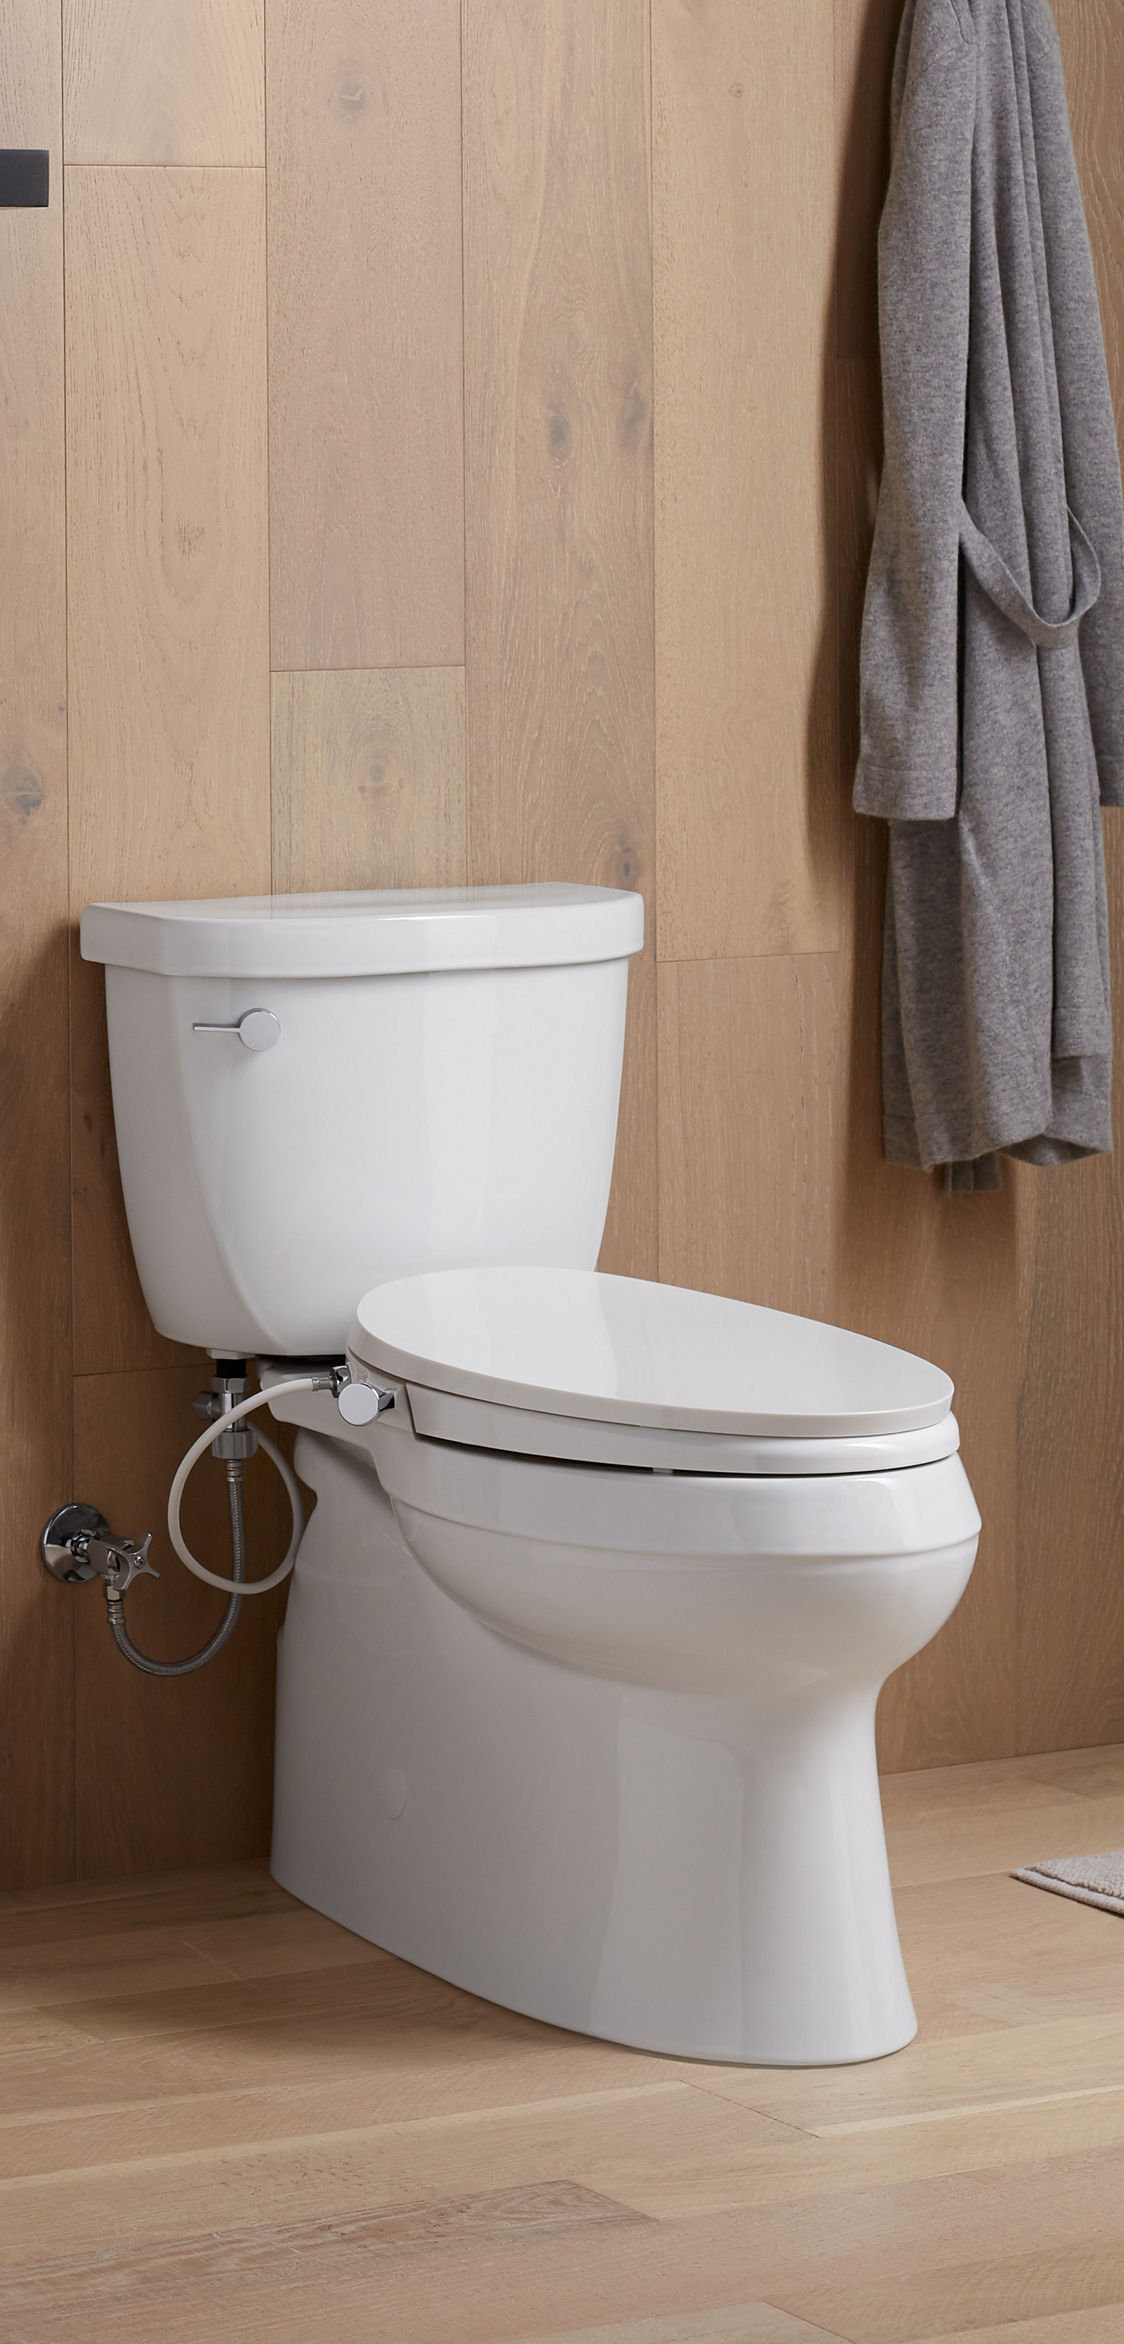 Toilet Seats Buying Guide, Shapes, Materials & More